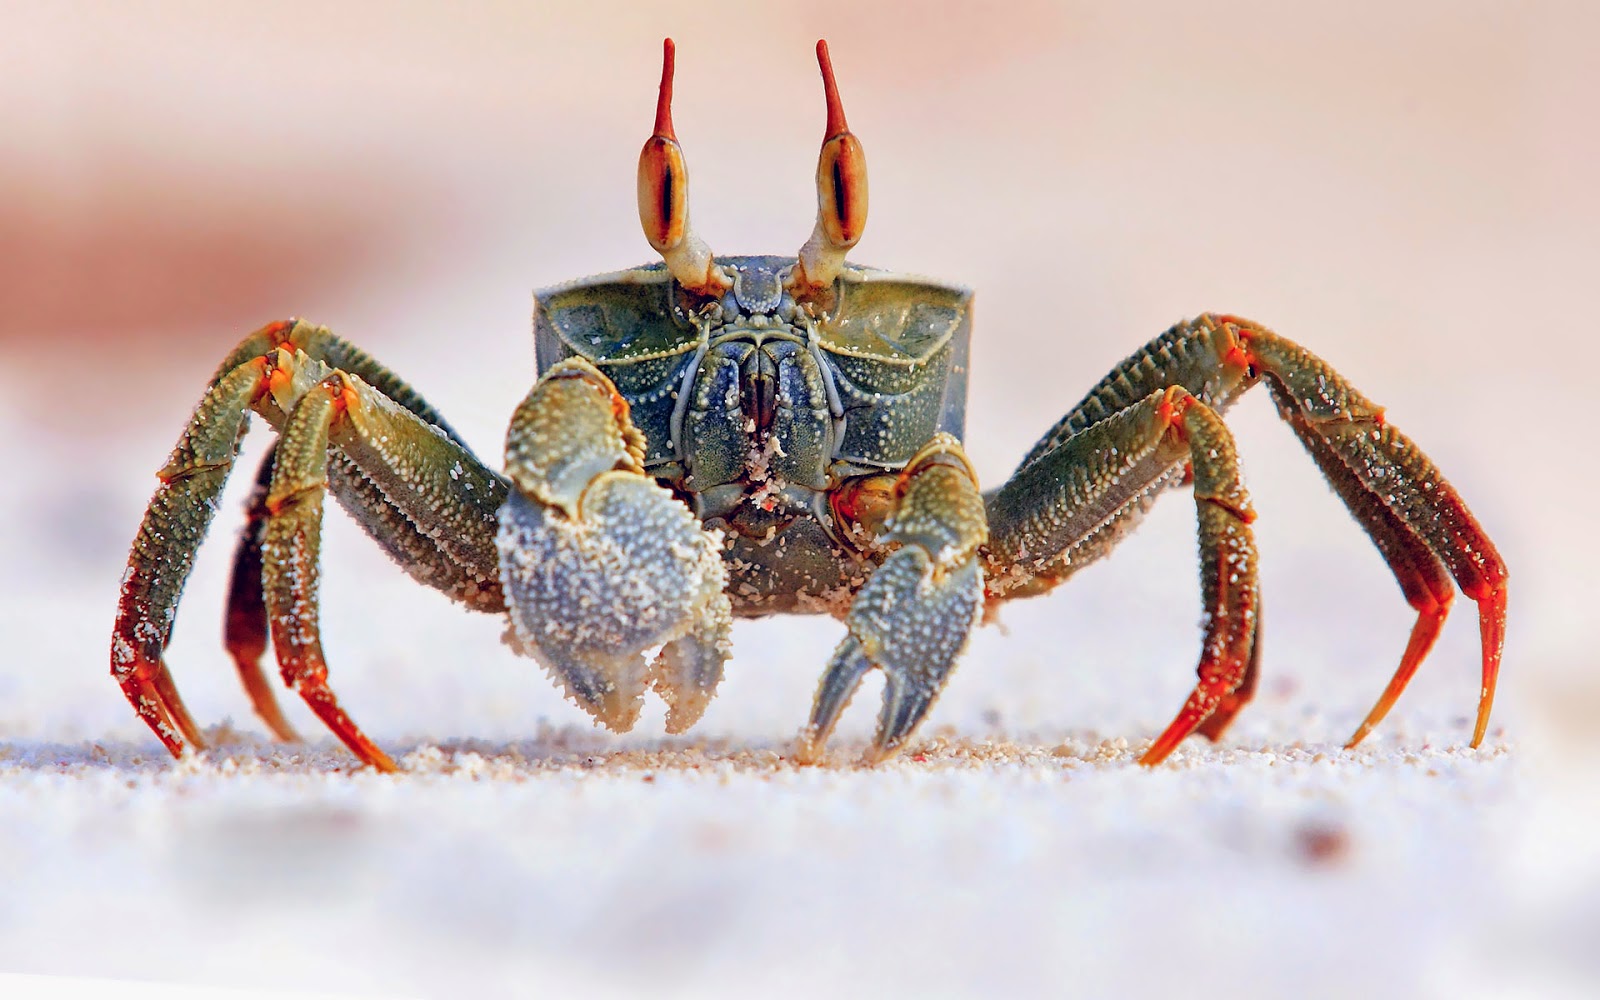 A Beautiful Crab Wallpaper For Windows, Mac Os Or Your - Interactive Science Grade 6 , HD Wallpaper & Backgrounds